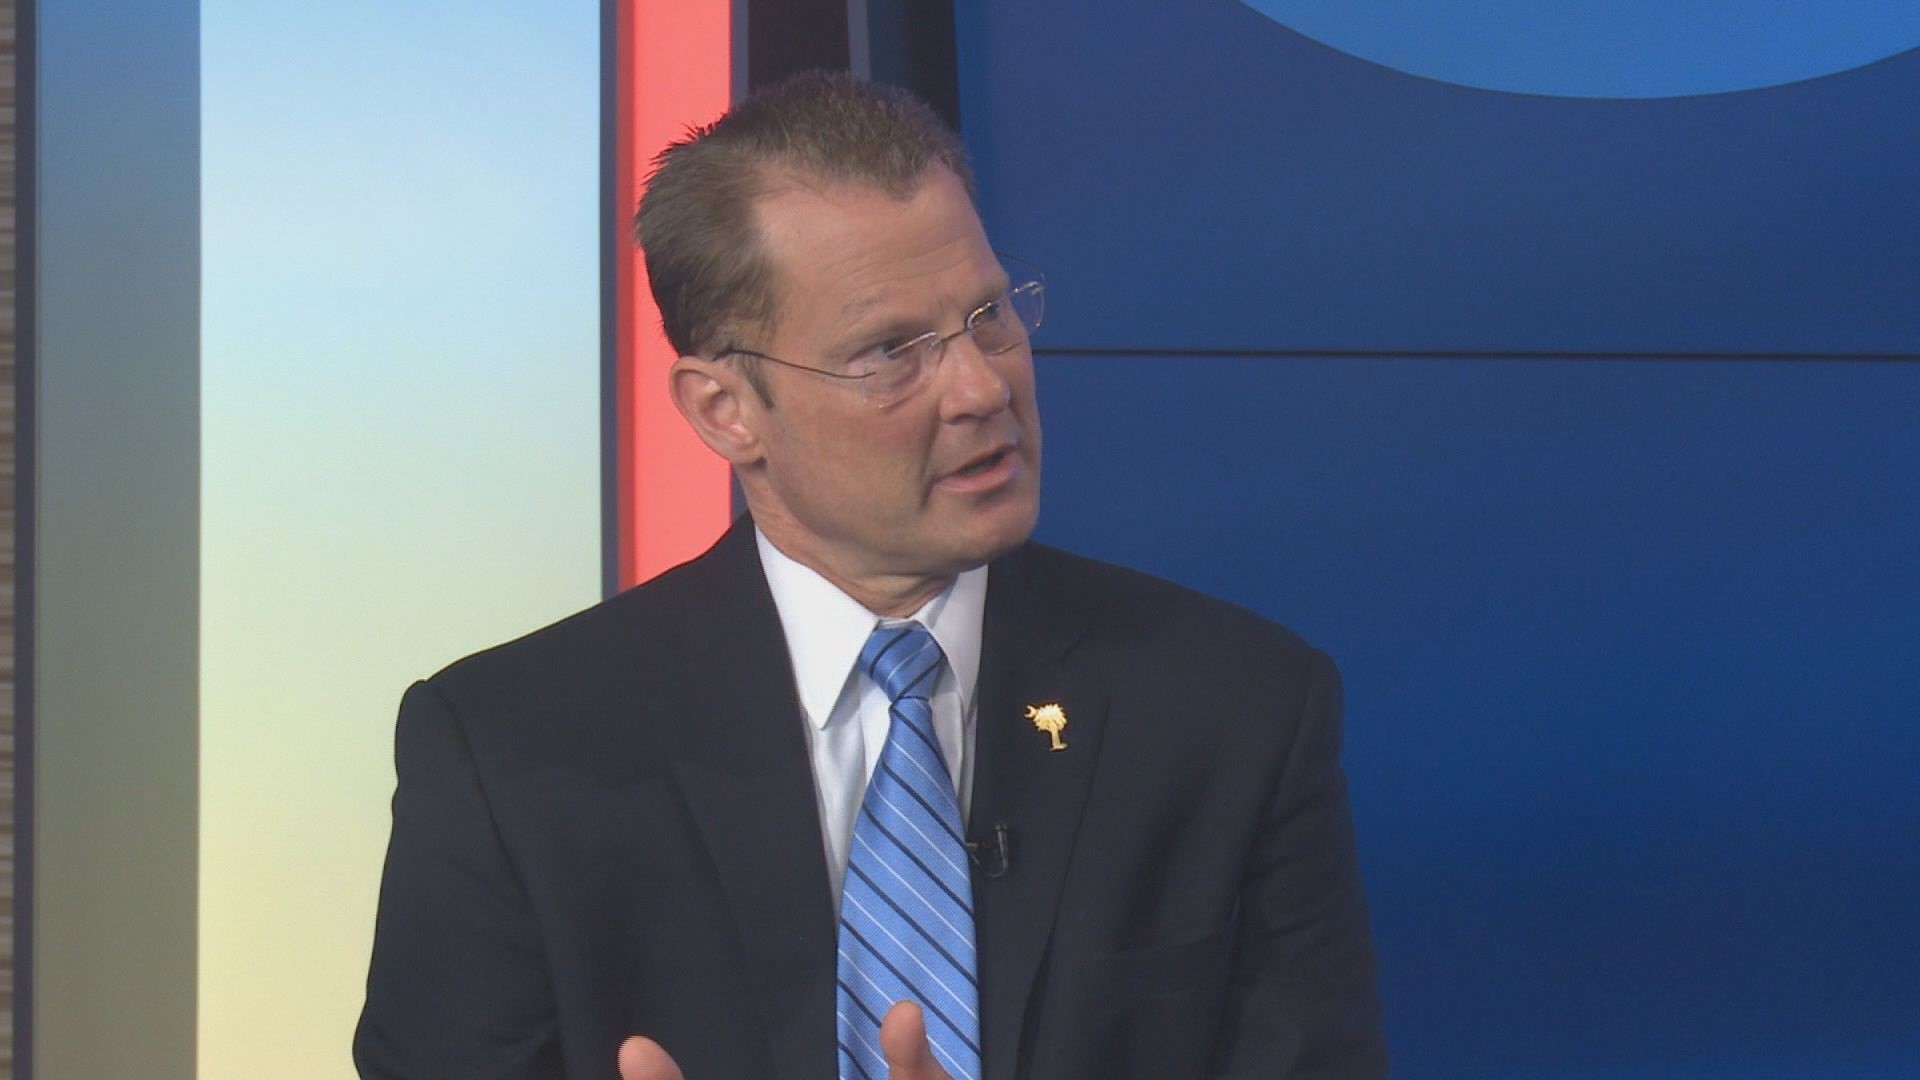 Lt. Gov. Kevin Bryant is among the candidates vying for the Republican nomination for governor of South Carolina.